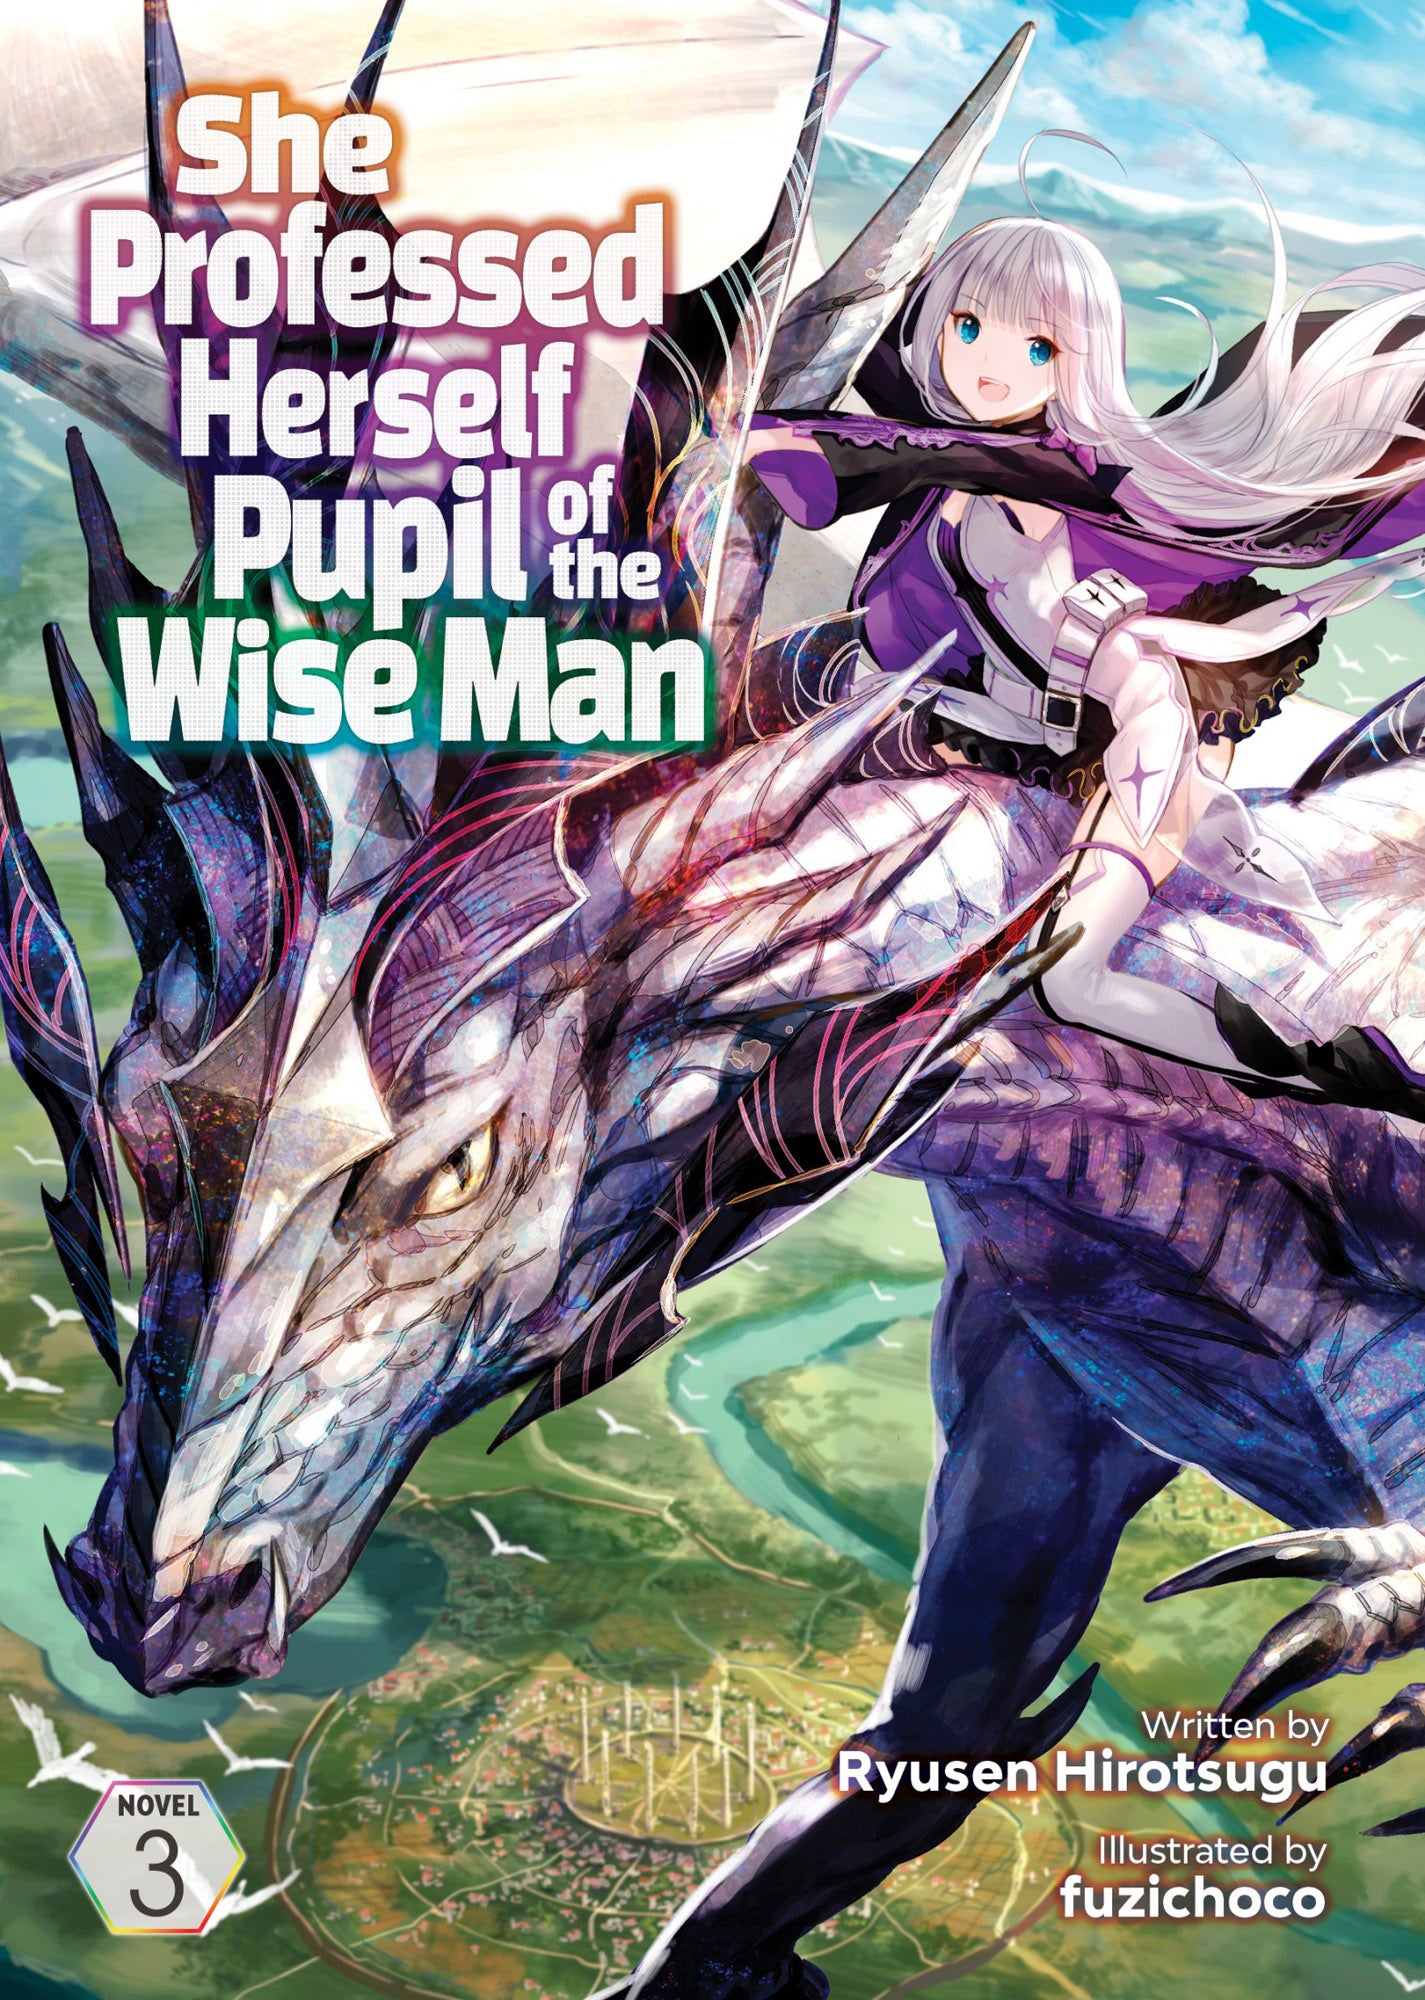 She Professed Herself Pupil of the Wise Man (Light Novel) Vol. 03